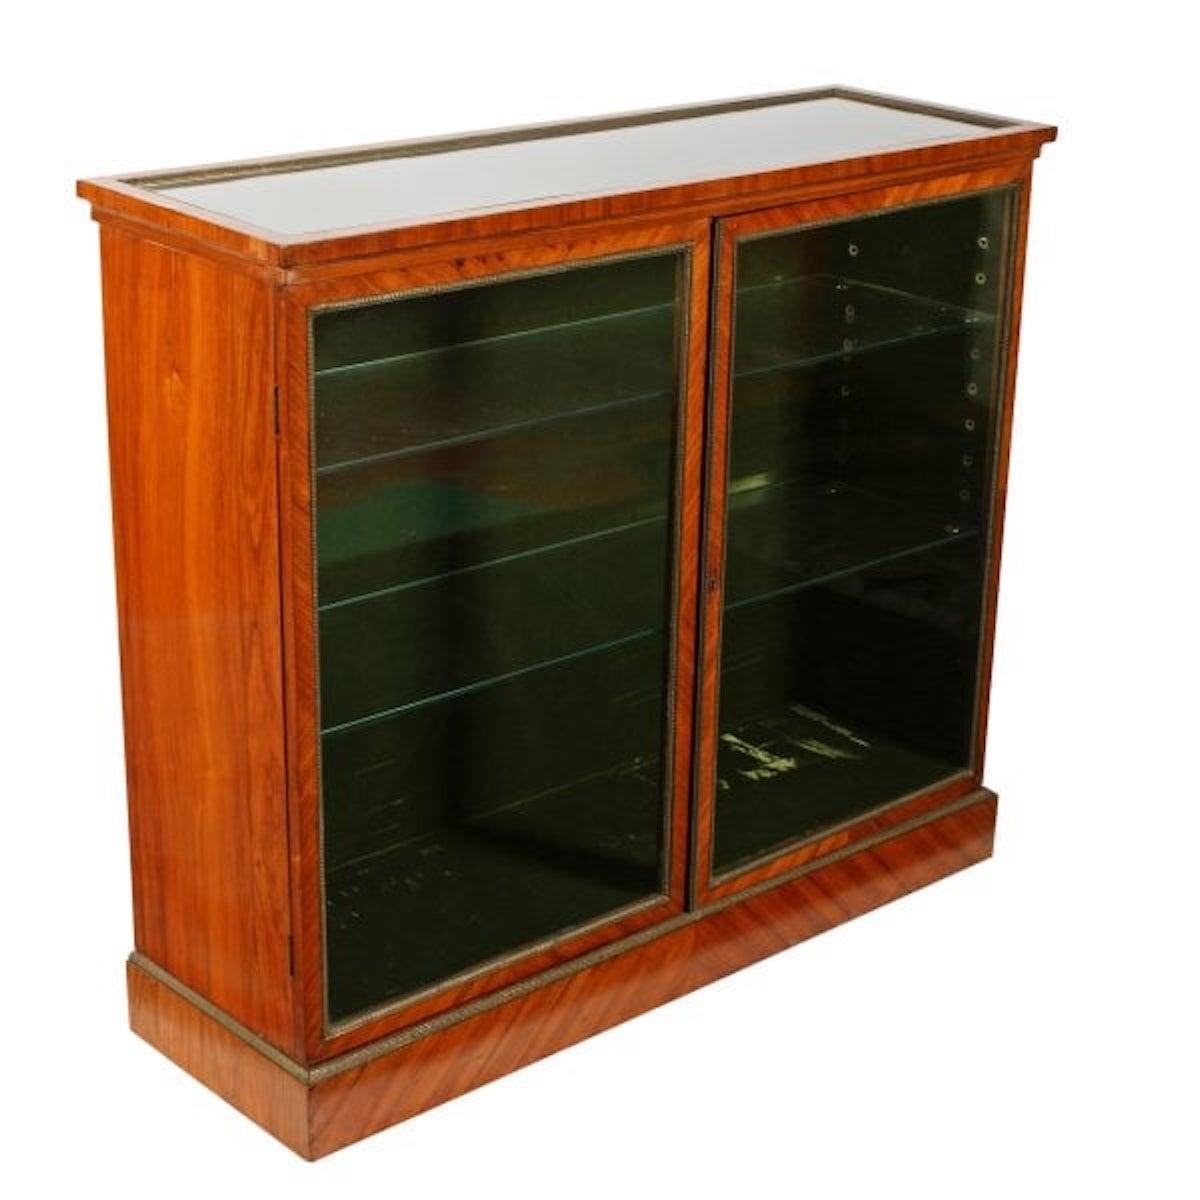 19th Century Victorian Kingwood vitrine

A 19th century Victorian kingwood veneered vitrine or show cabinet.

The cabinet has a glazed top and a pair of glazed doors with two adjustable glass shelves inside.

The top frame and door frames are